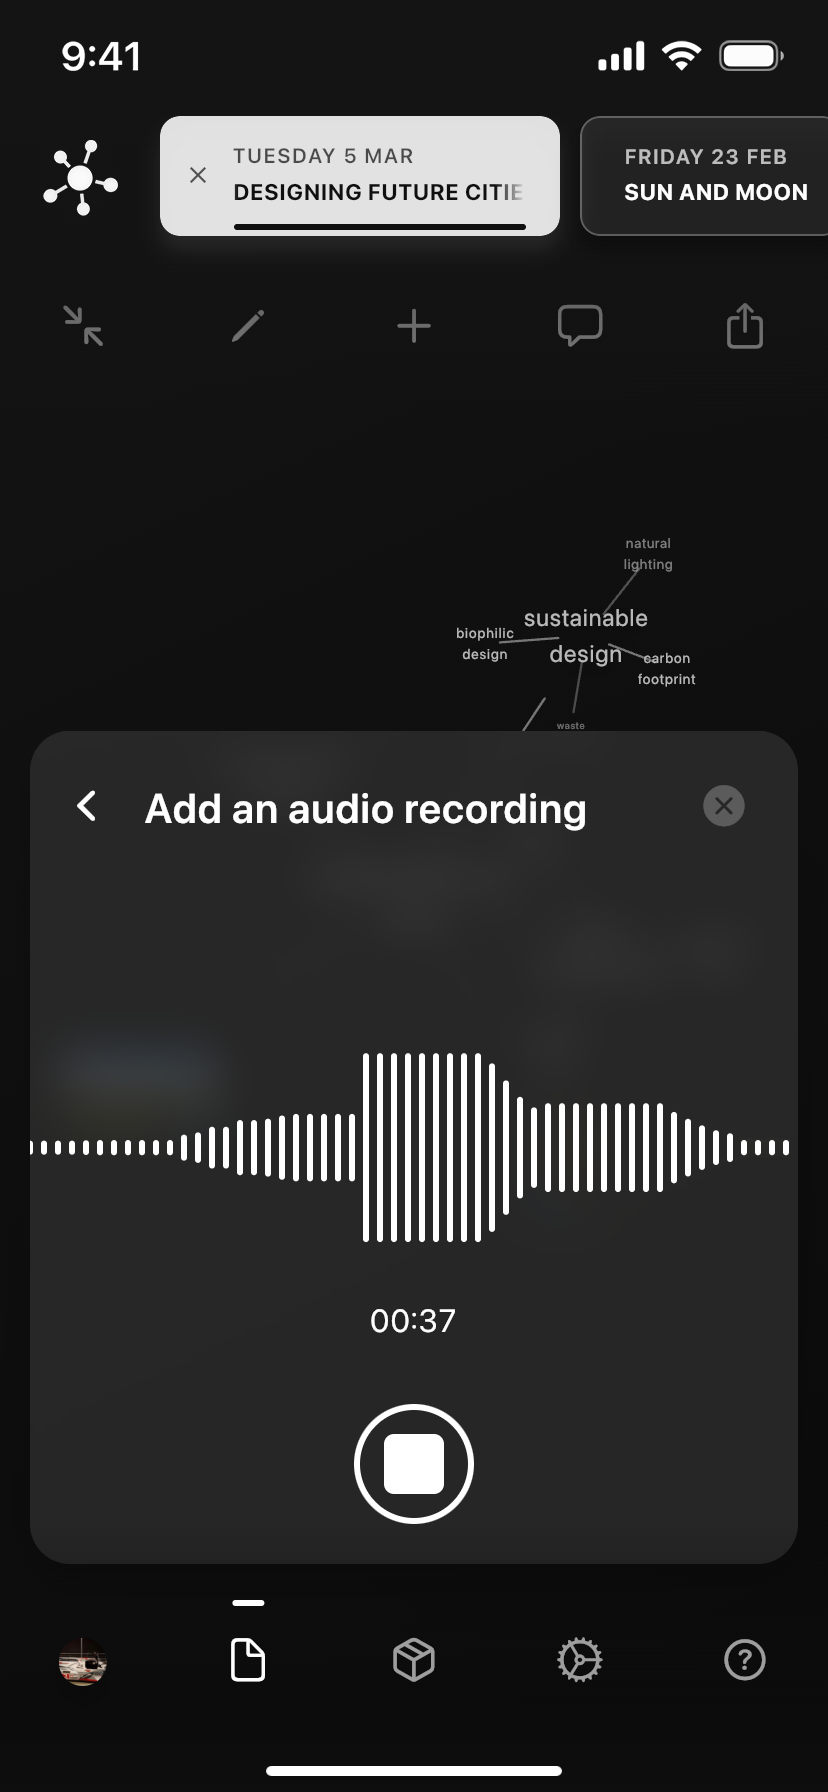 and even audio recordings !